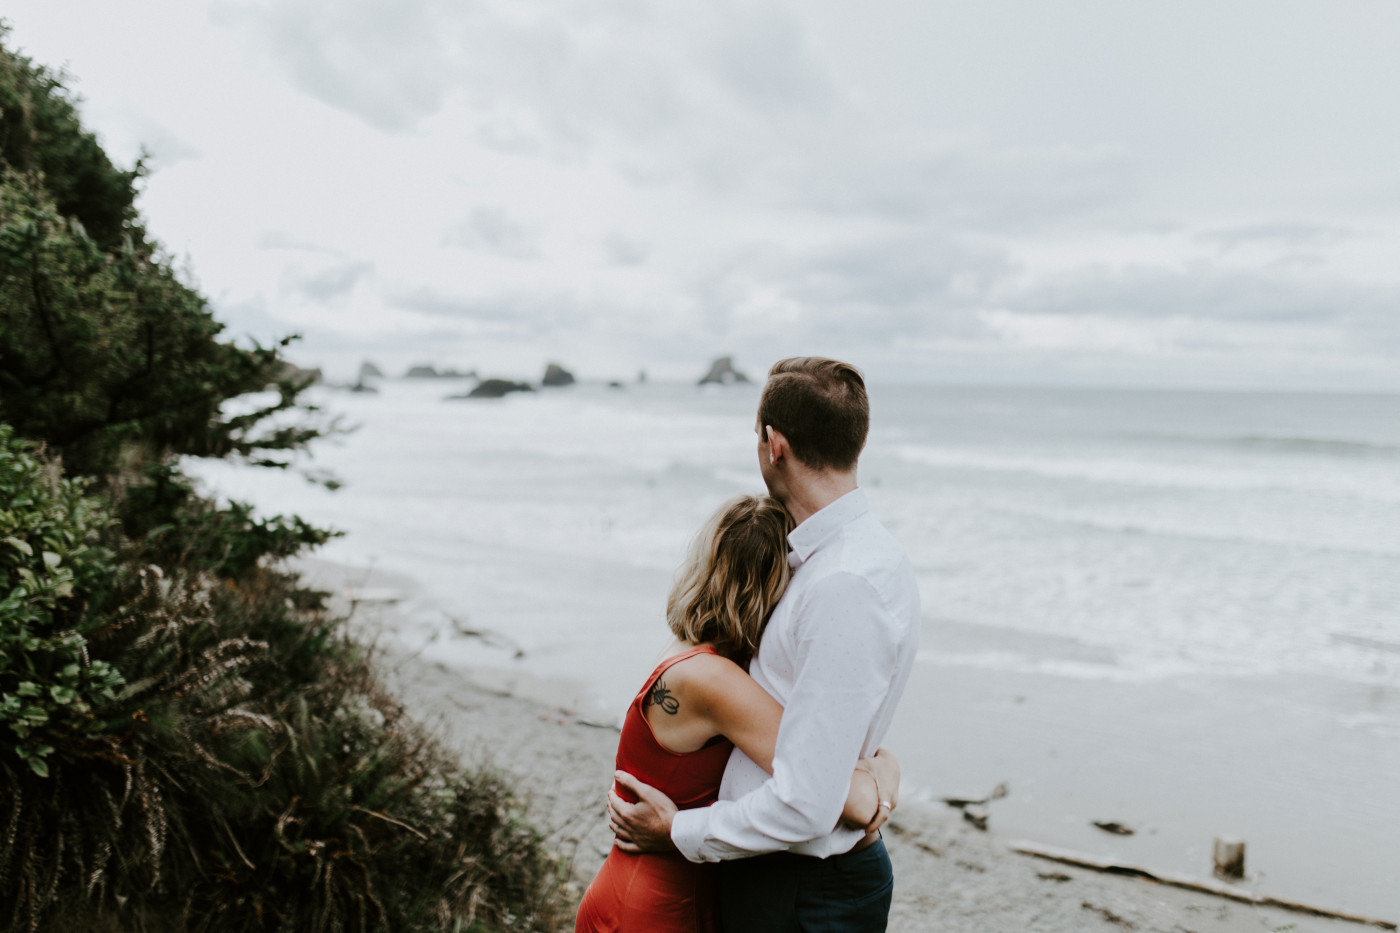 Chelsey hugs billy on the beach at Cannon Beach. Elopement wedding photography at Cannon Beach by Sienna Plus Josh.